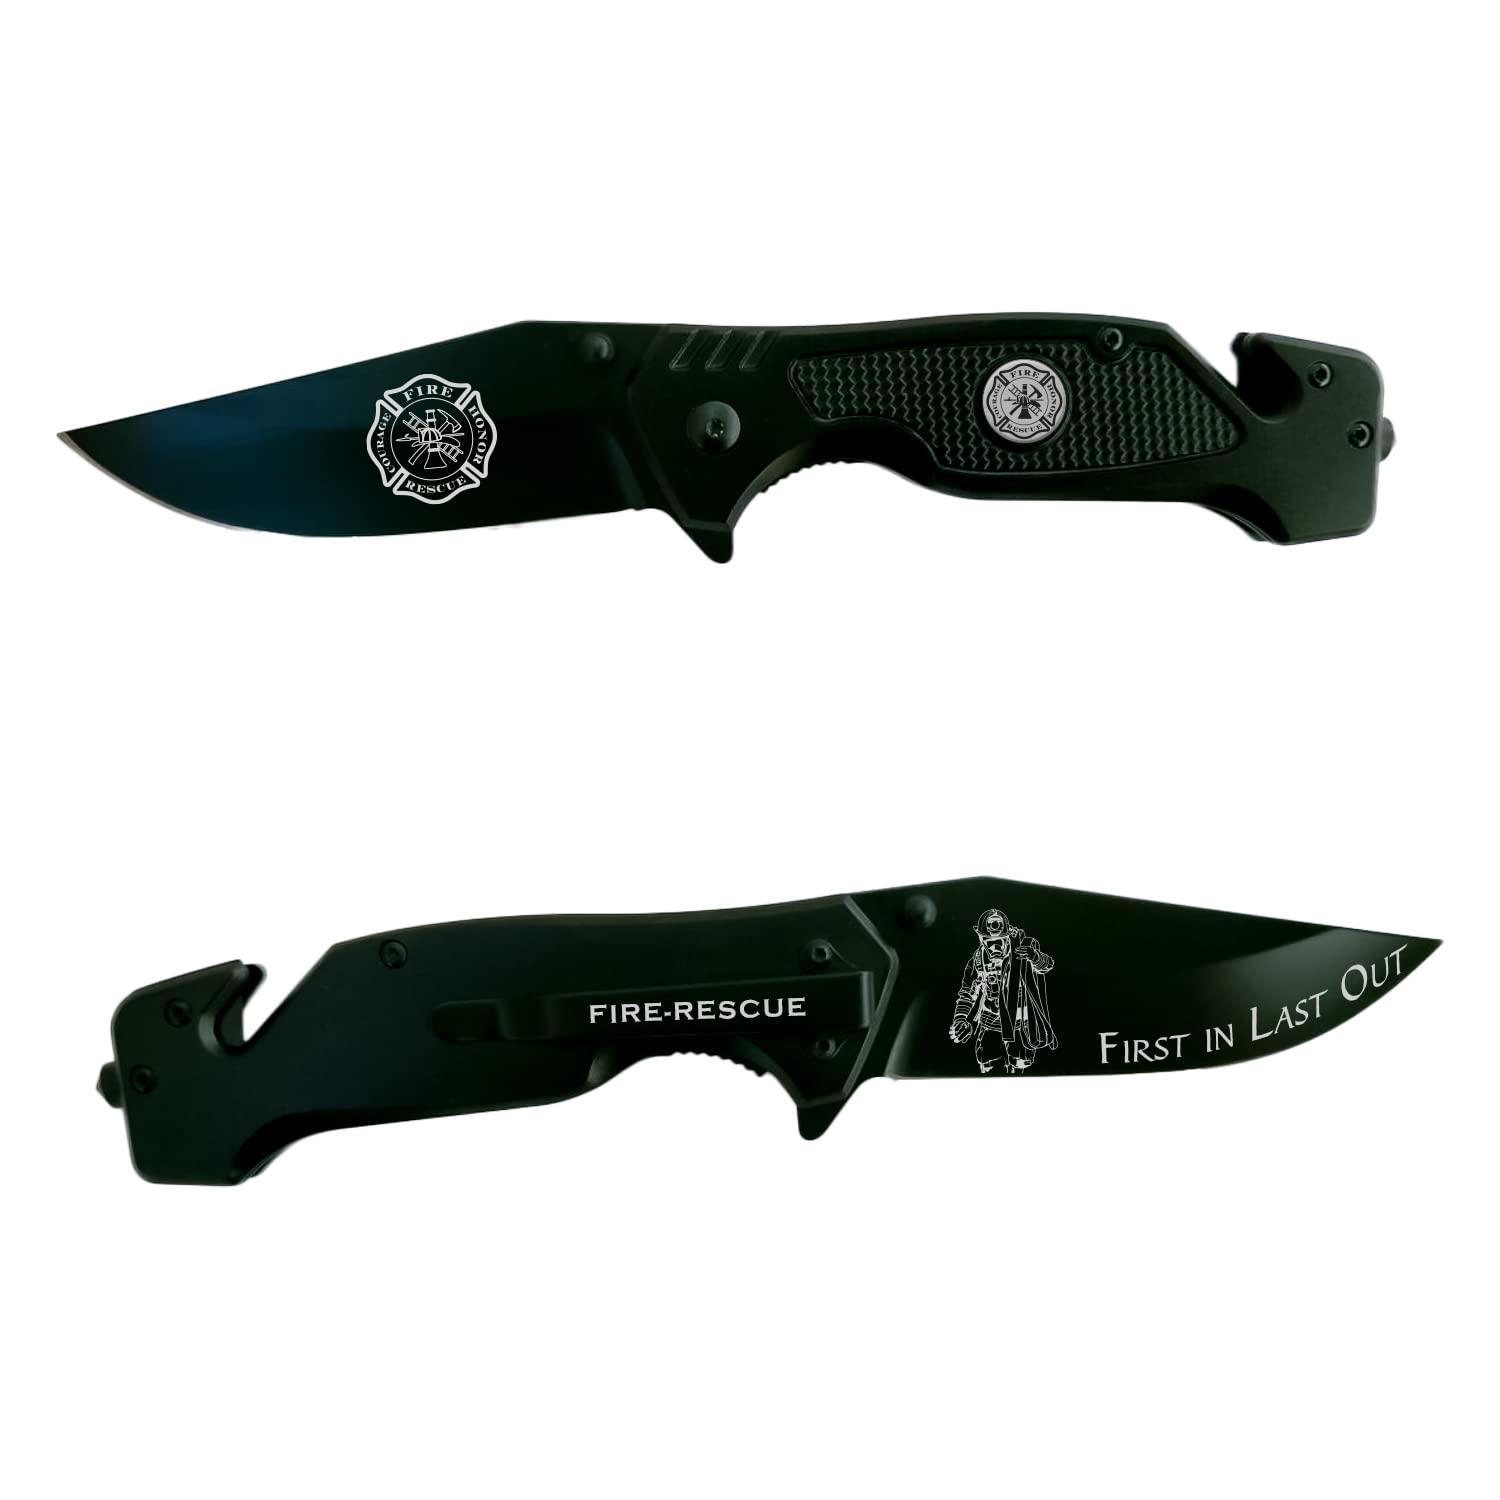 Firefighter Black Stealth Elite Folding Tactical Knife - Fireman Rescue Knife - First Responder Gift - Service Disabled Veteran Owned Small Business